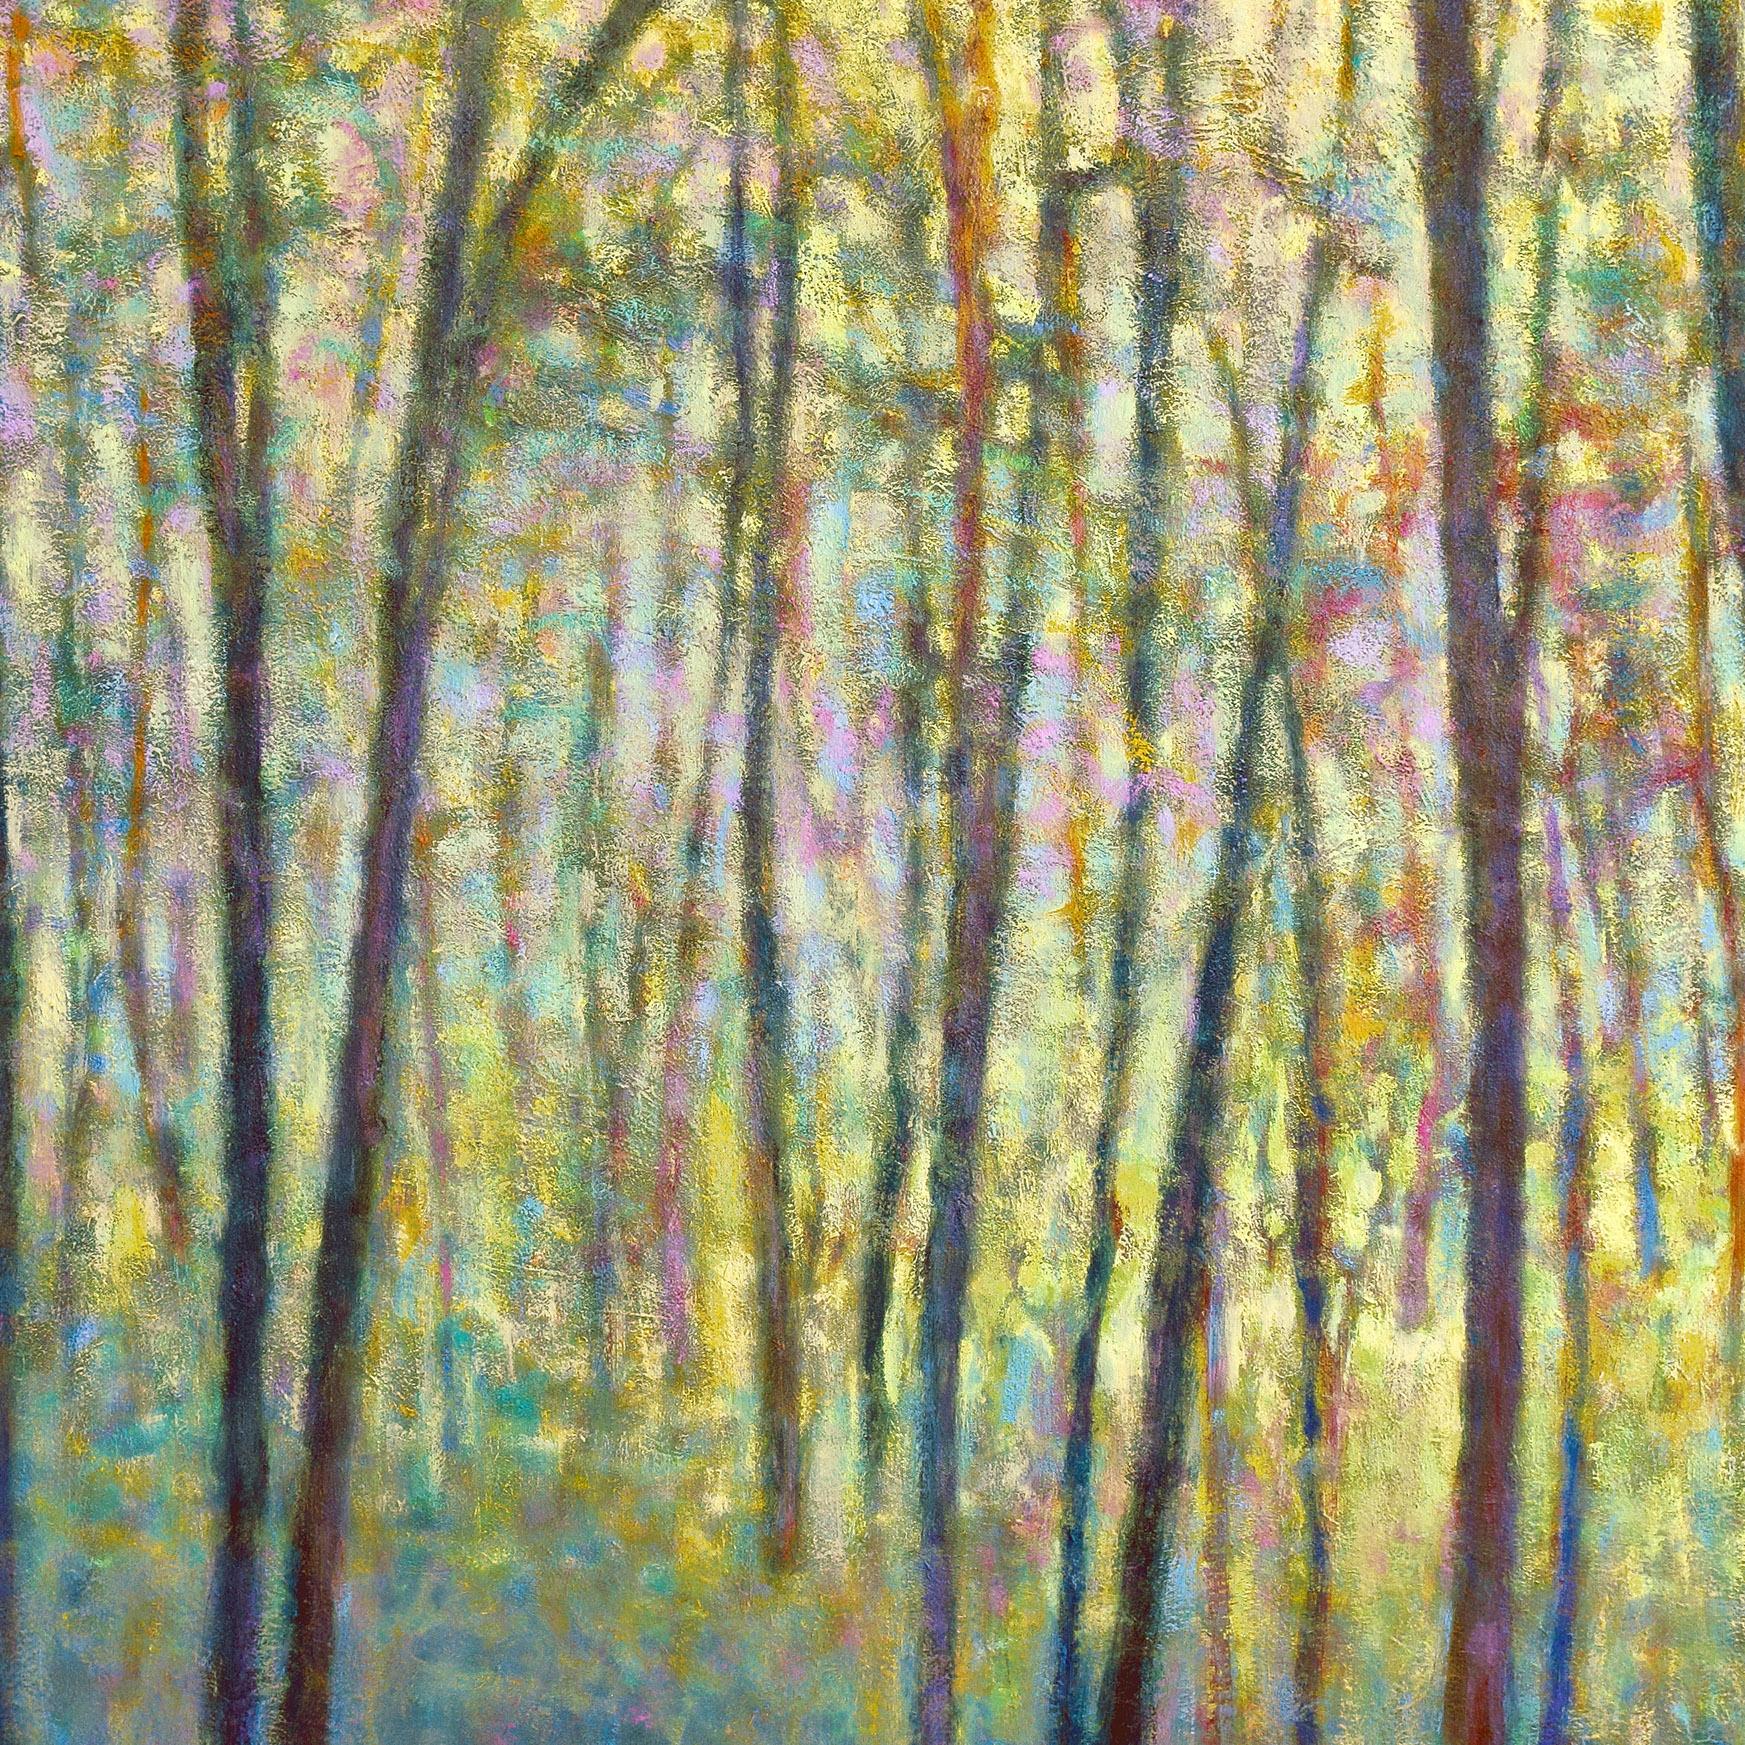 This abstract landscape statement painting by Ken Elliott features a warm palette and impressionistic style. It pictures a forest-scape with thin, dark tree trunks, surrounded by bright yellow and warmer dabs of lavender, teal, and red. The piece